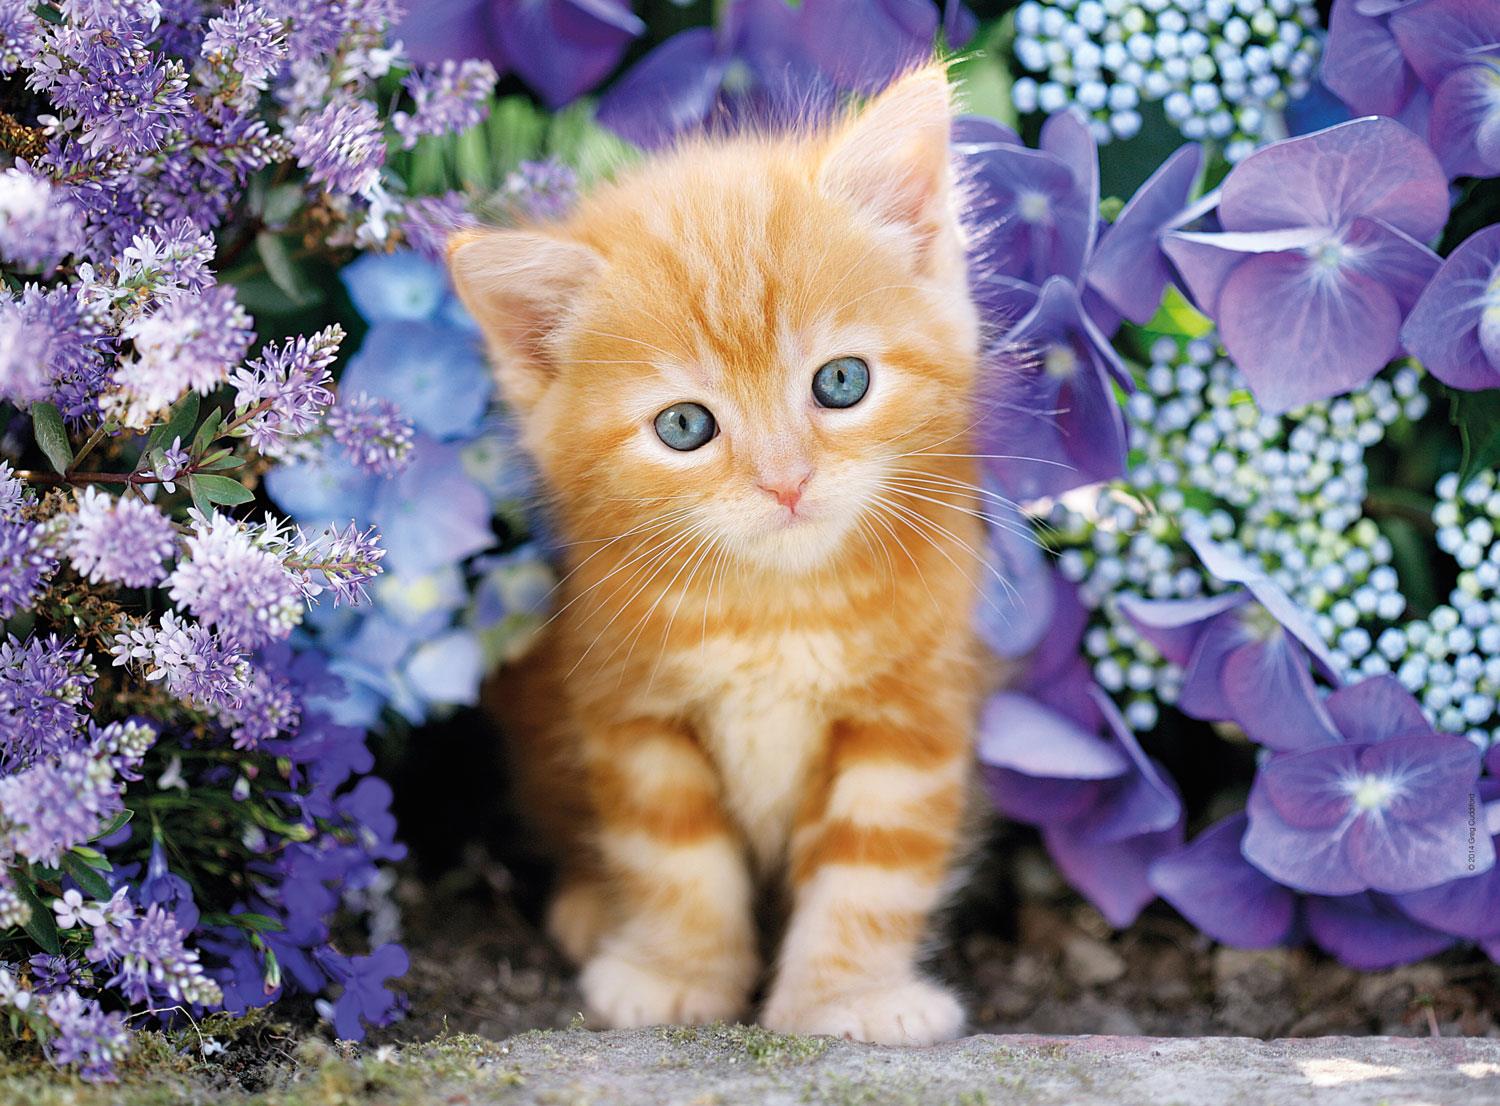 Clementoni Ginger Cat In Flowers High Quality Jigsaw Puzzle (500 Pieces)